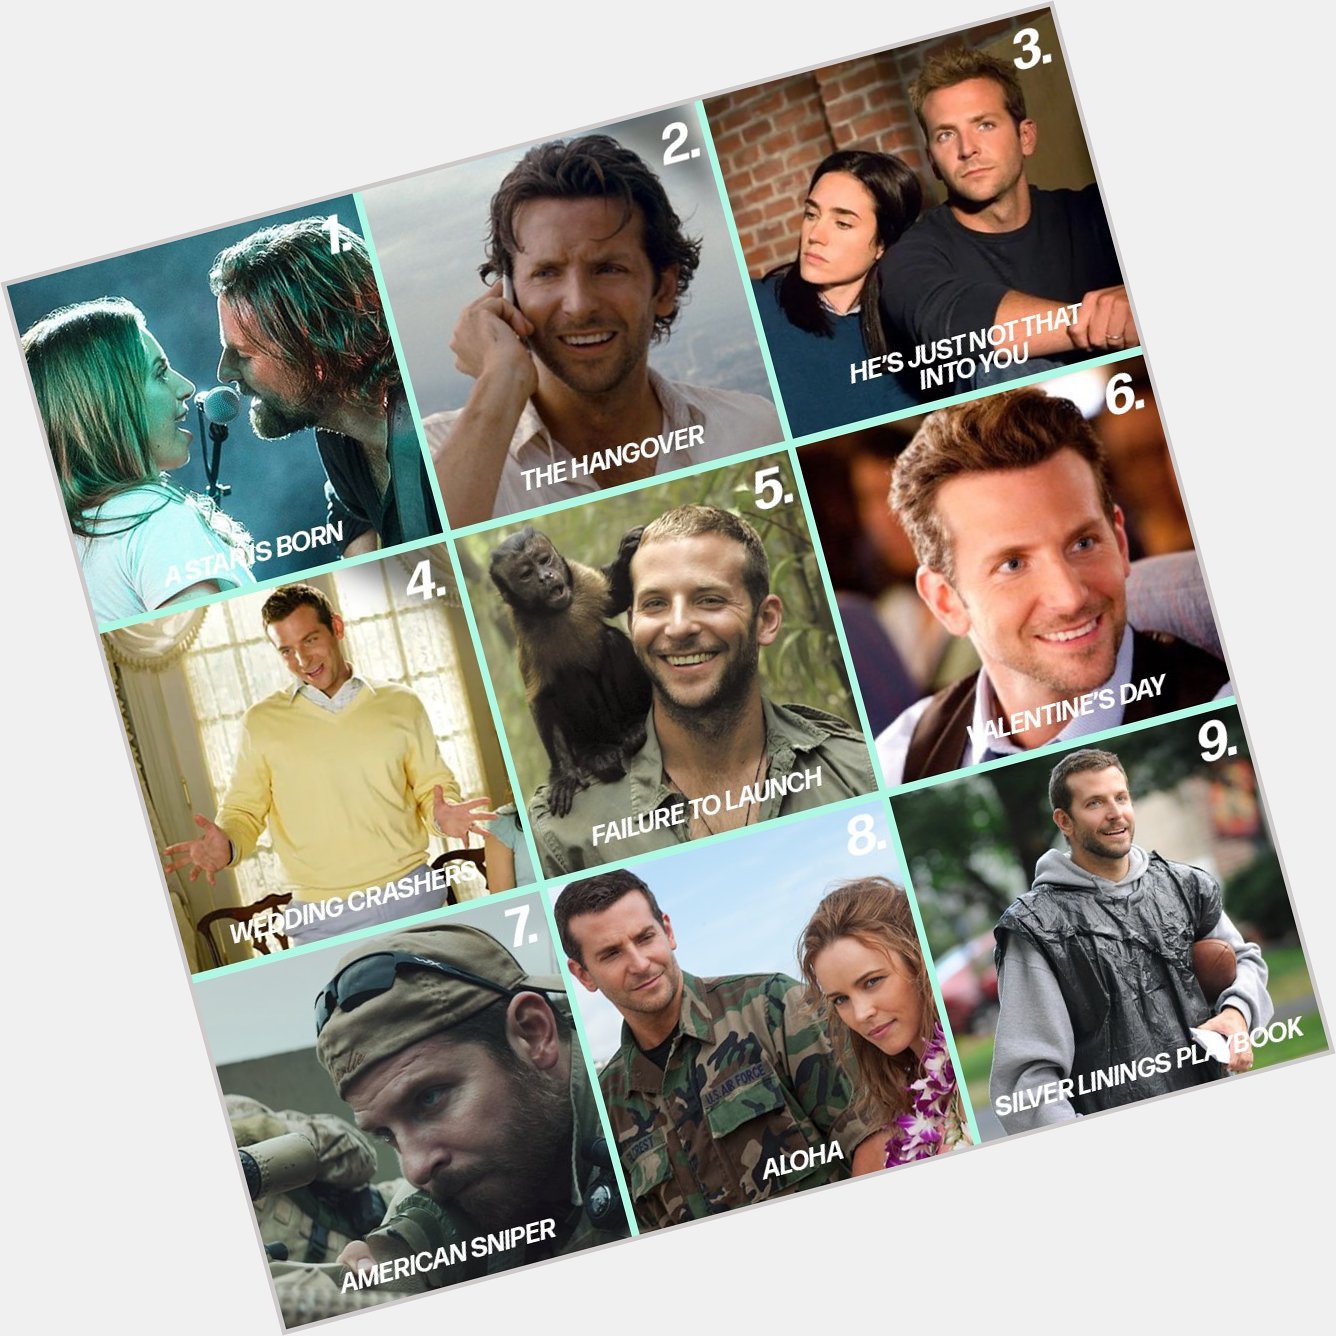 Happy 47th birthday to Bradley Cooper What\s your favourite Cooper film? I\ll go first...A Star Is Born 